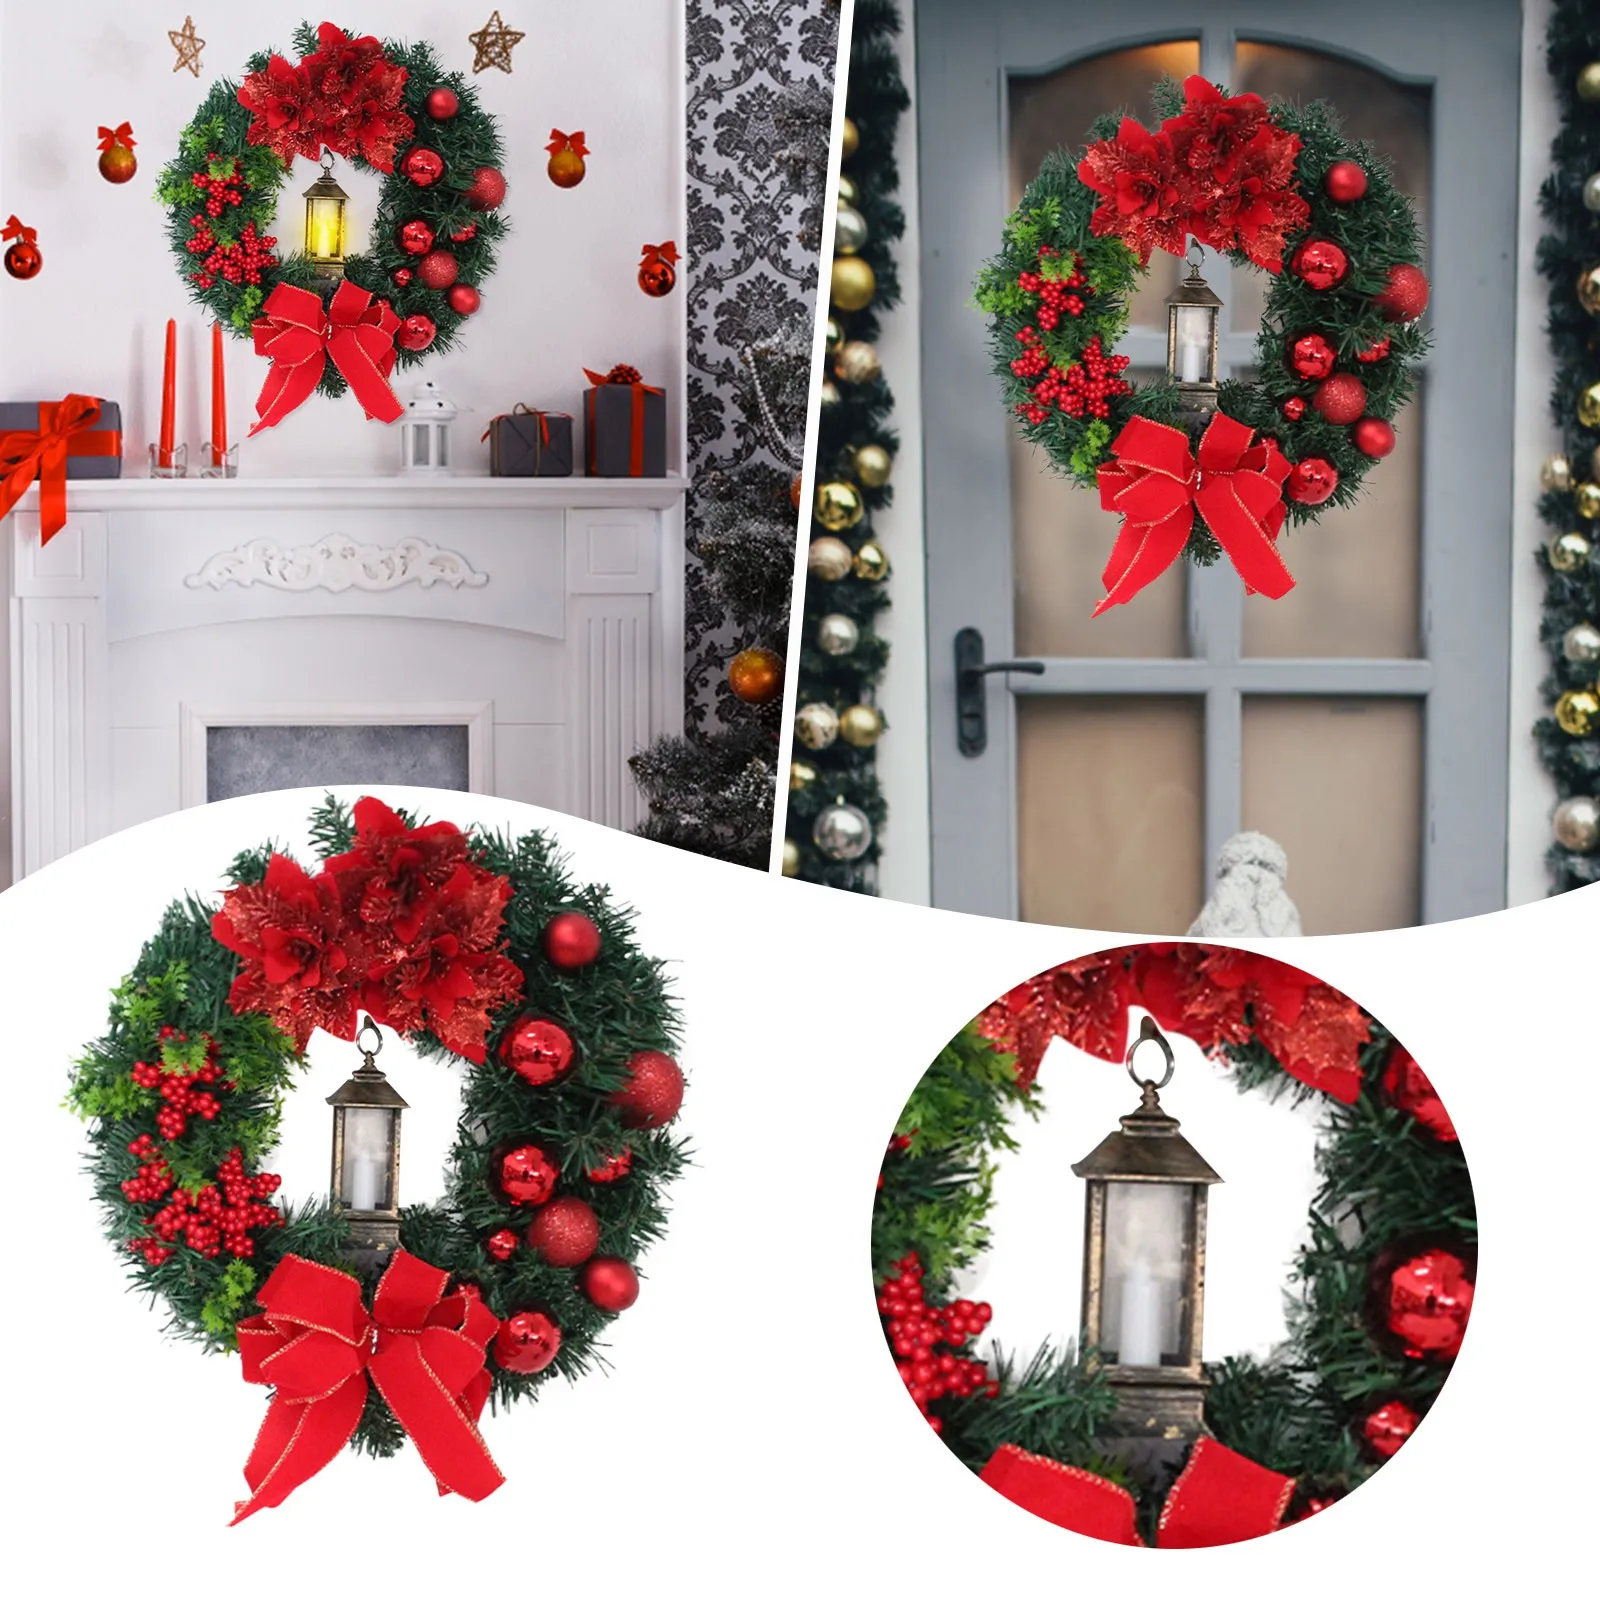 

Holy Christmas Wreath With Lights Lit Christmas Scene Wreath Christmas Wreath With Warm LED Lights At The Front Door Big Spring